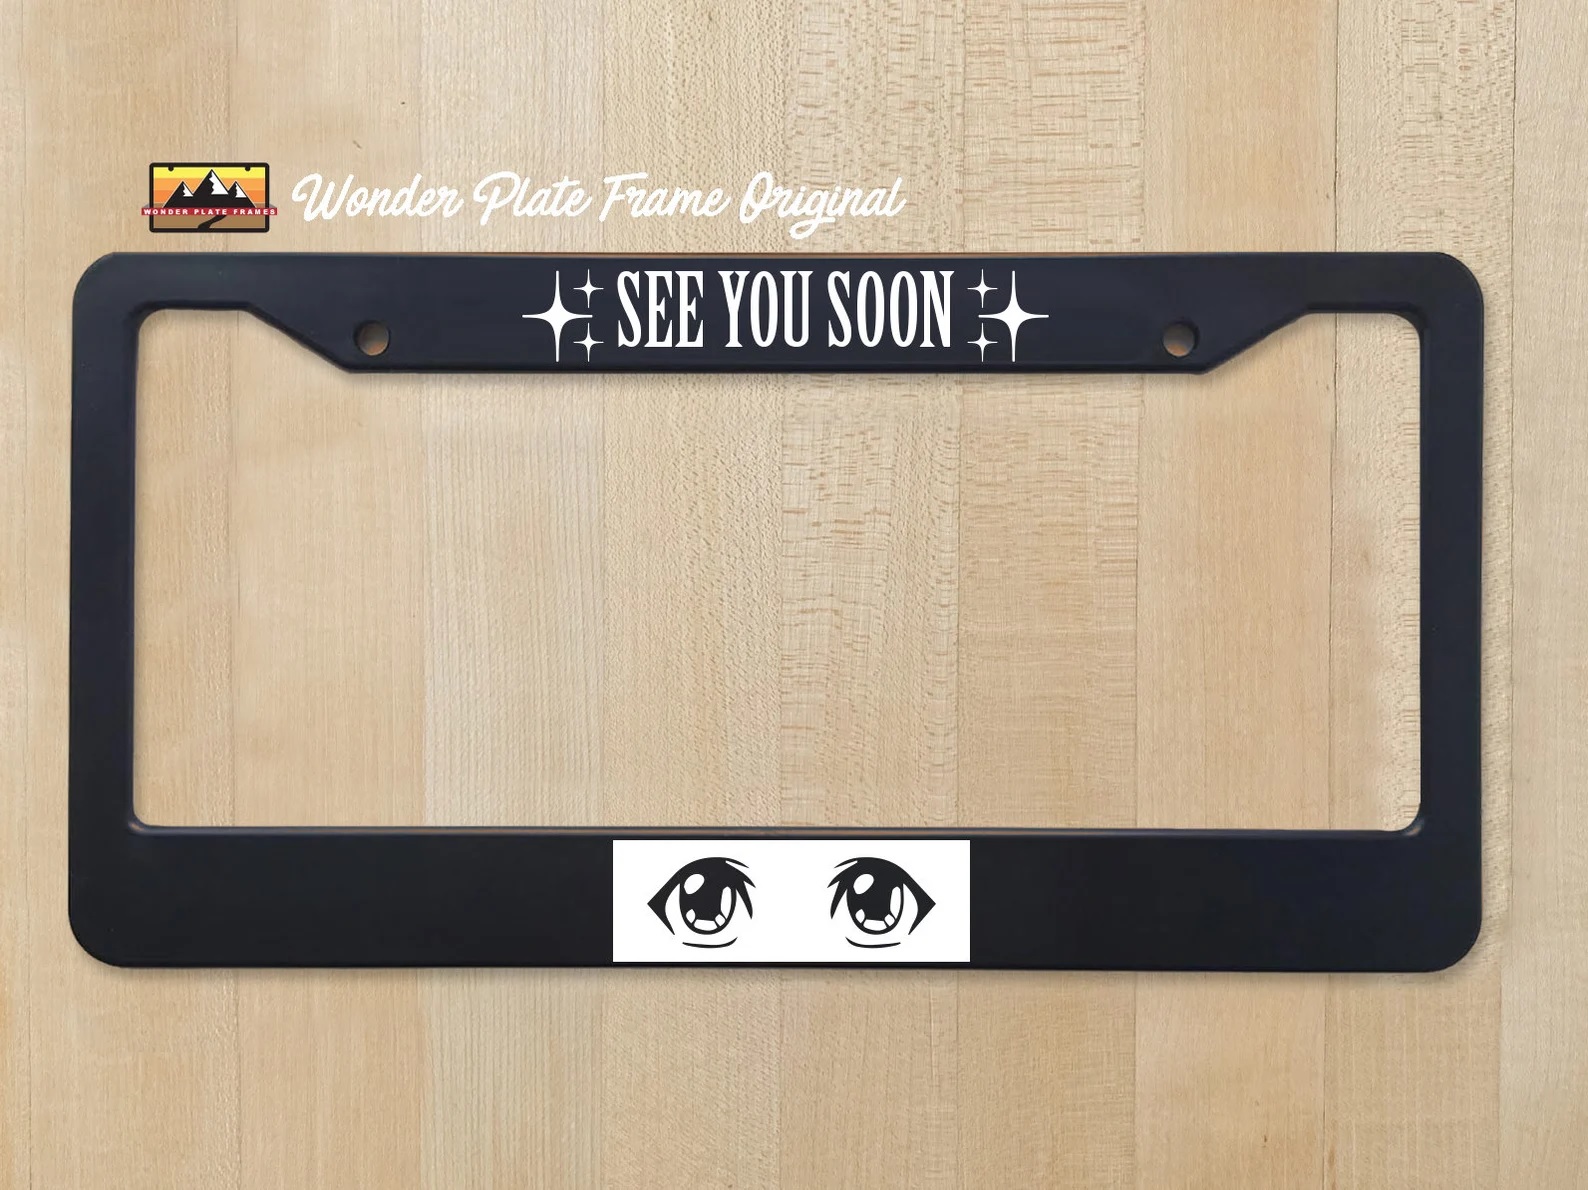 A black license plate frame with the words "see you soon!" on top and an anime girl's eyes on the bottom